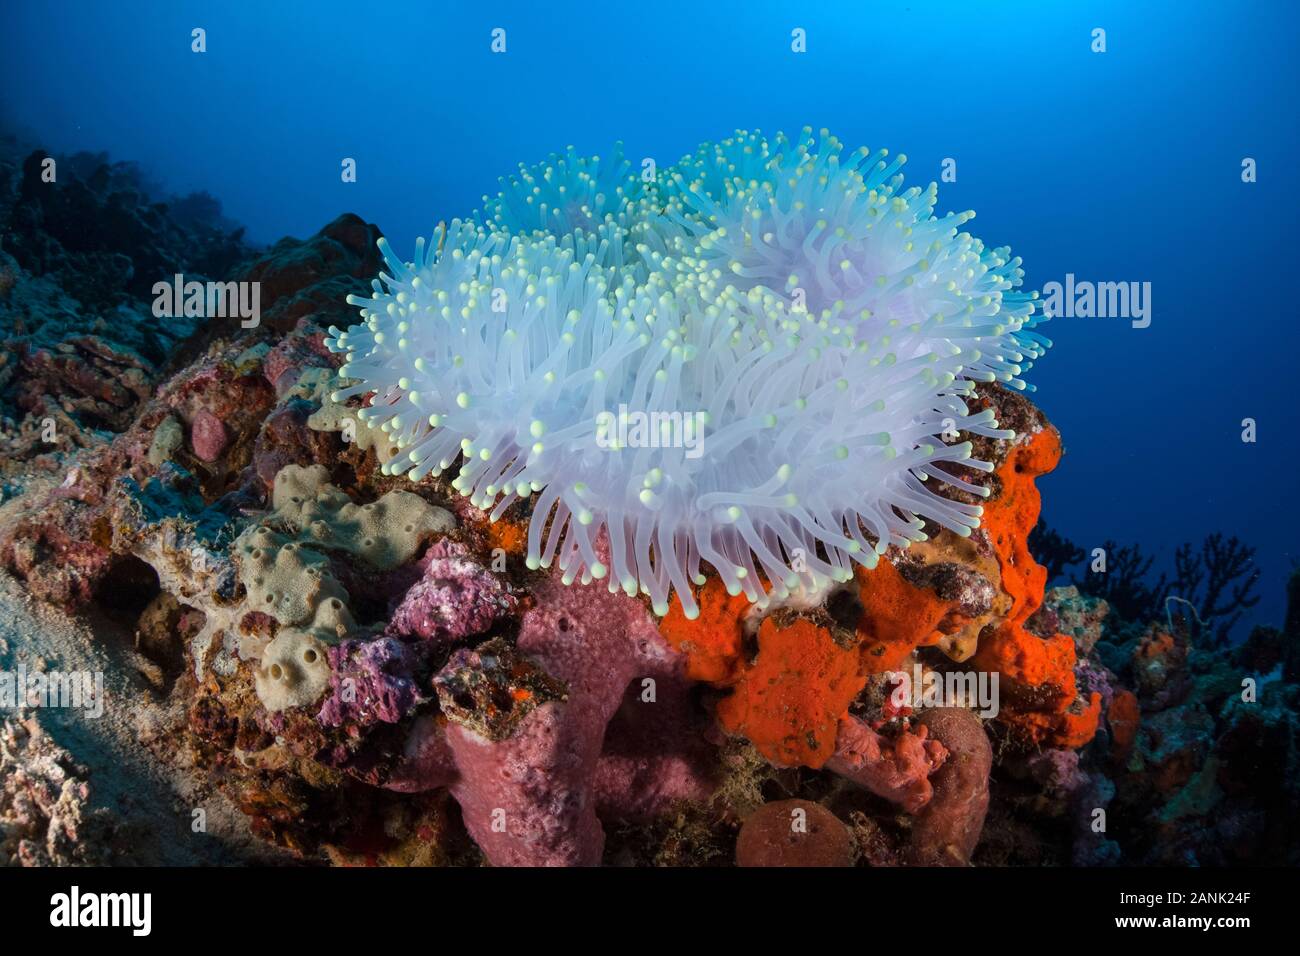 A bleached magnificent sea anemone, Heteractis magnifica, is found on a reef off the coast of Sulawesi in Indonesia Stock Photo